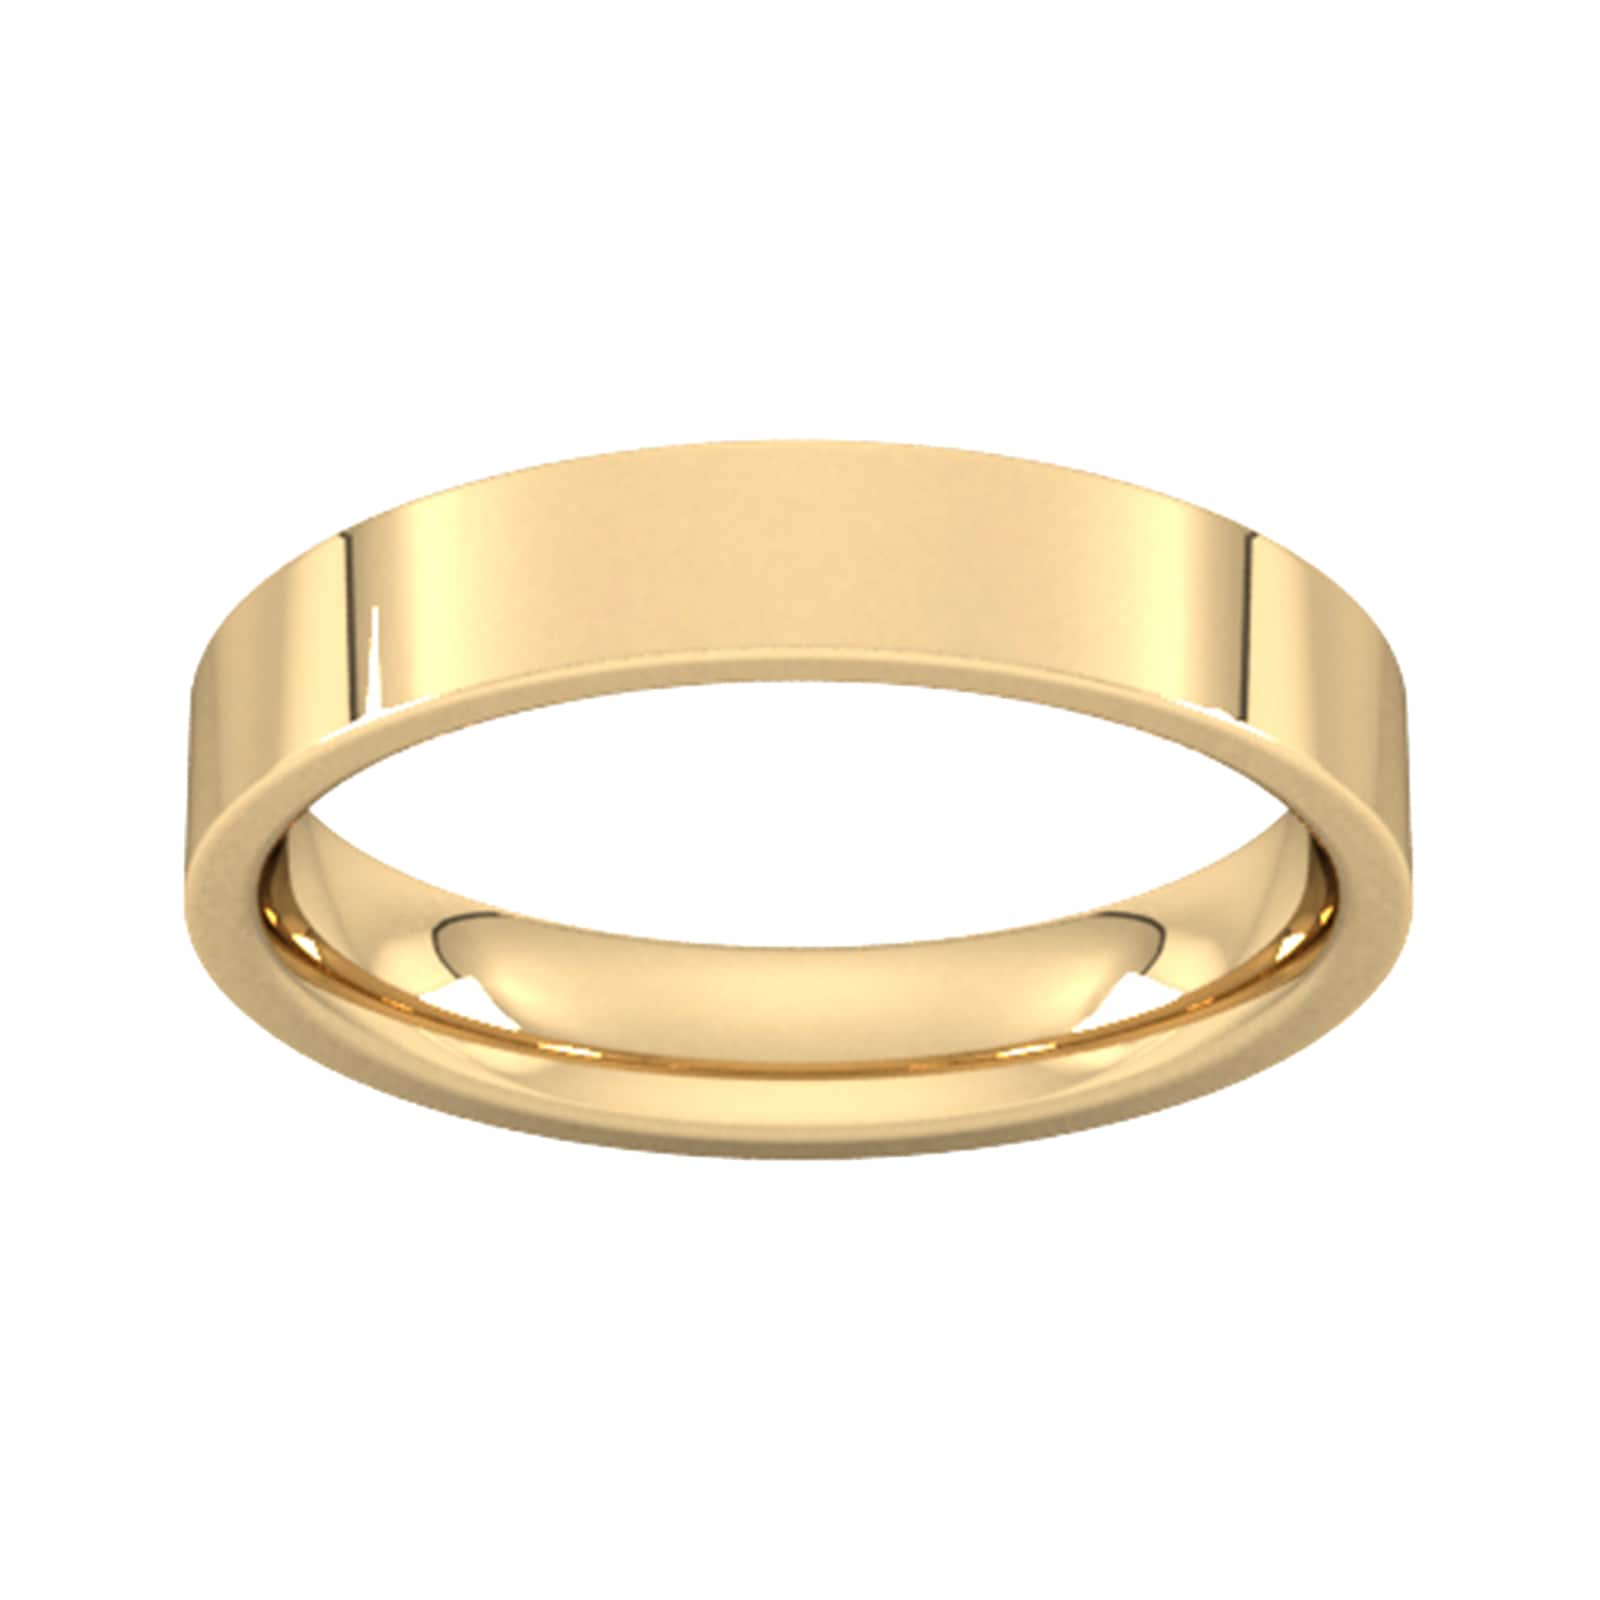 4mm Flat Court Heavy Wedding Ring In 9 Carat Yellow Gold - Ring Size J